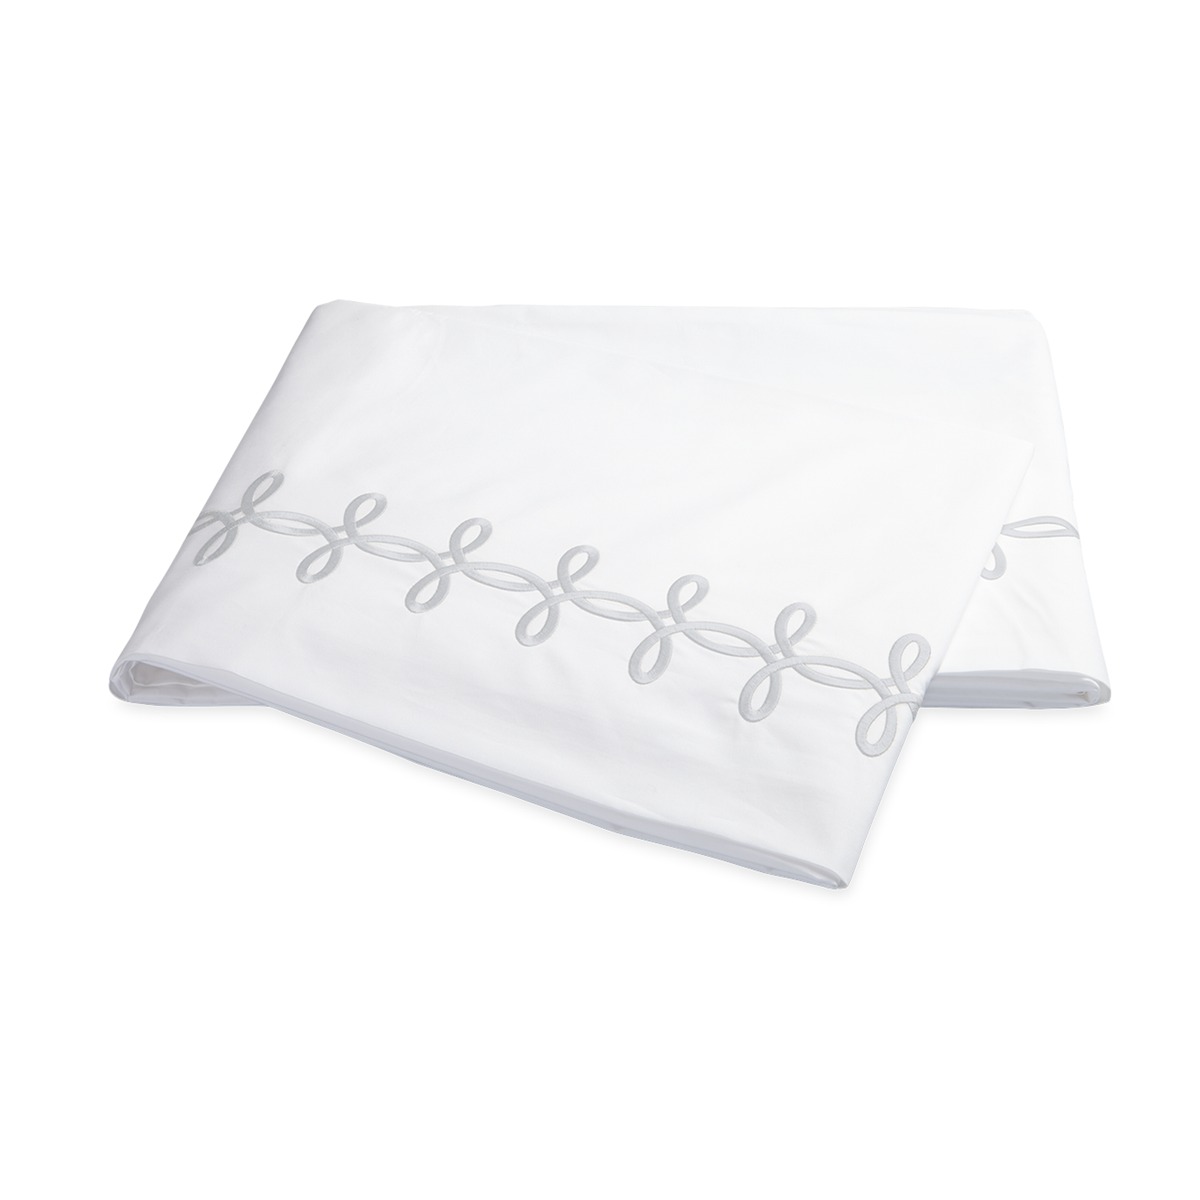 Folded Flat Sheet of Matouk Gordian Knot Bedding Silver Color